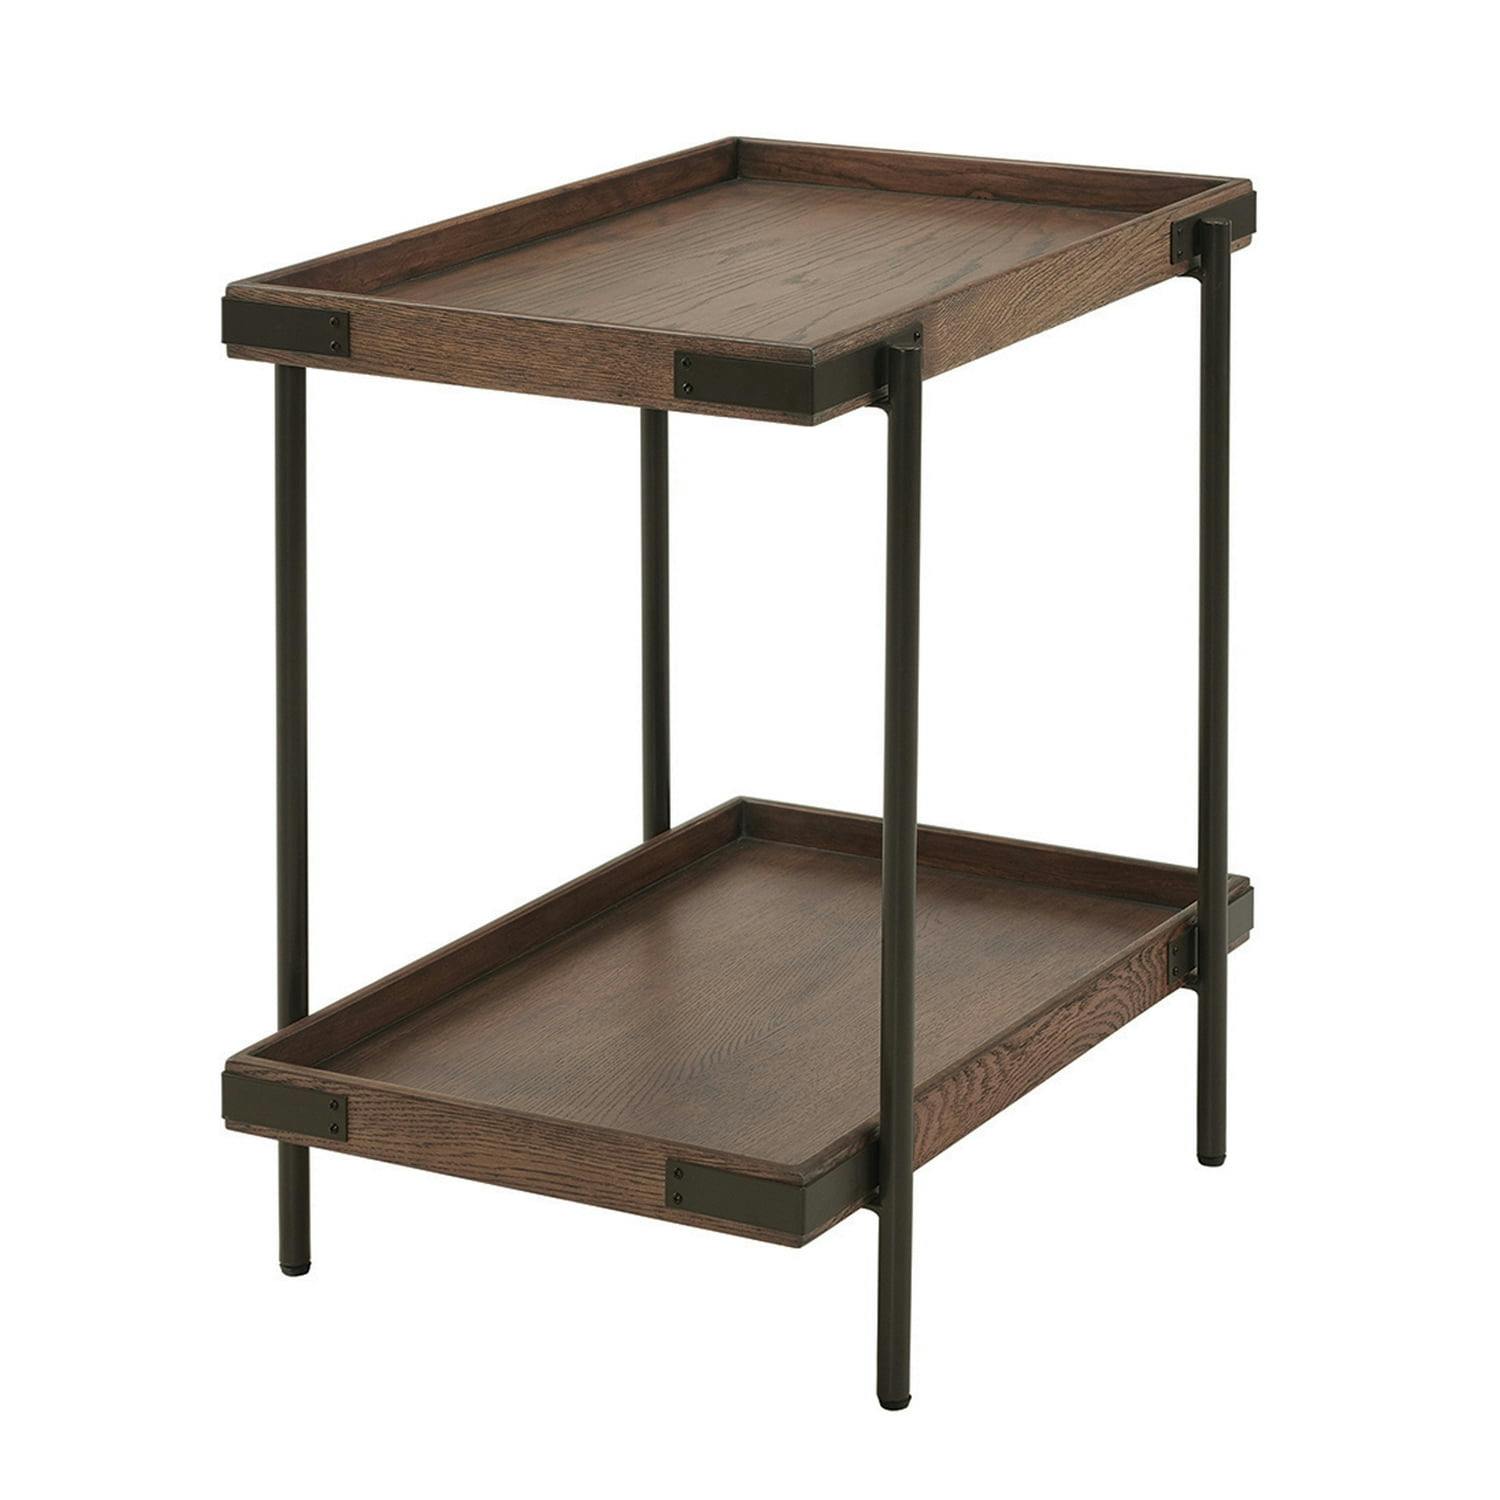 Kyra 27" Oak and Metal Industrial Side Table with Shelf